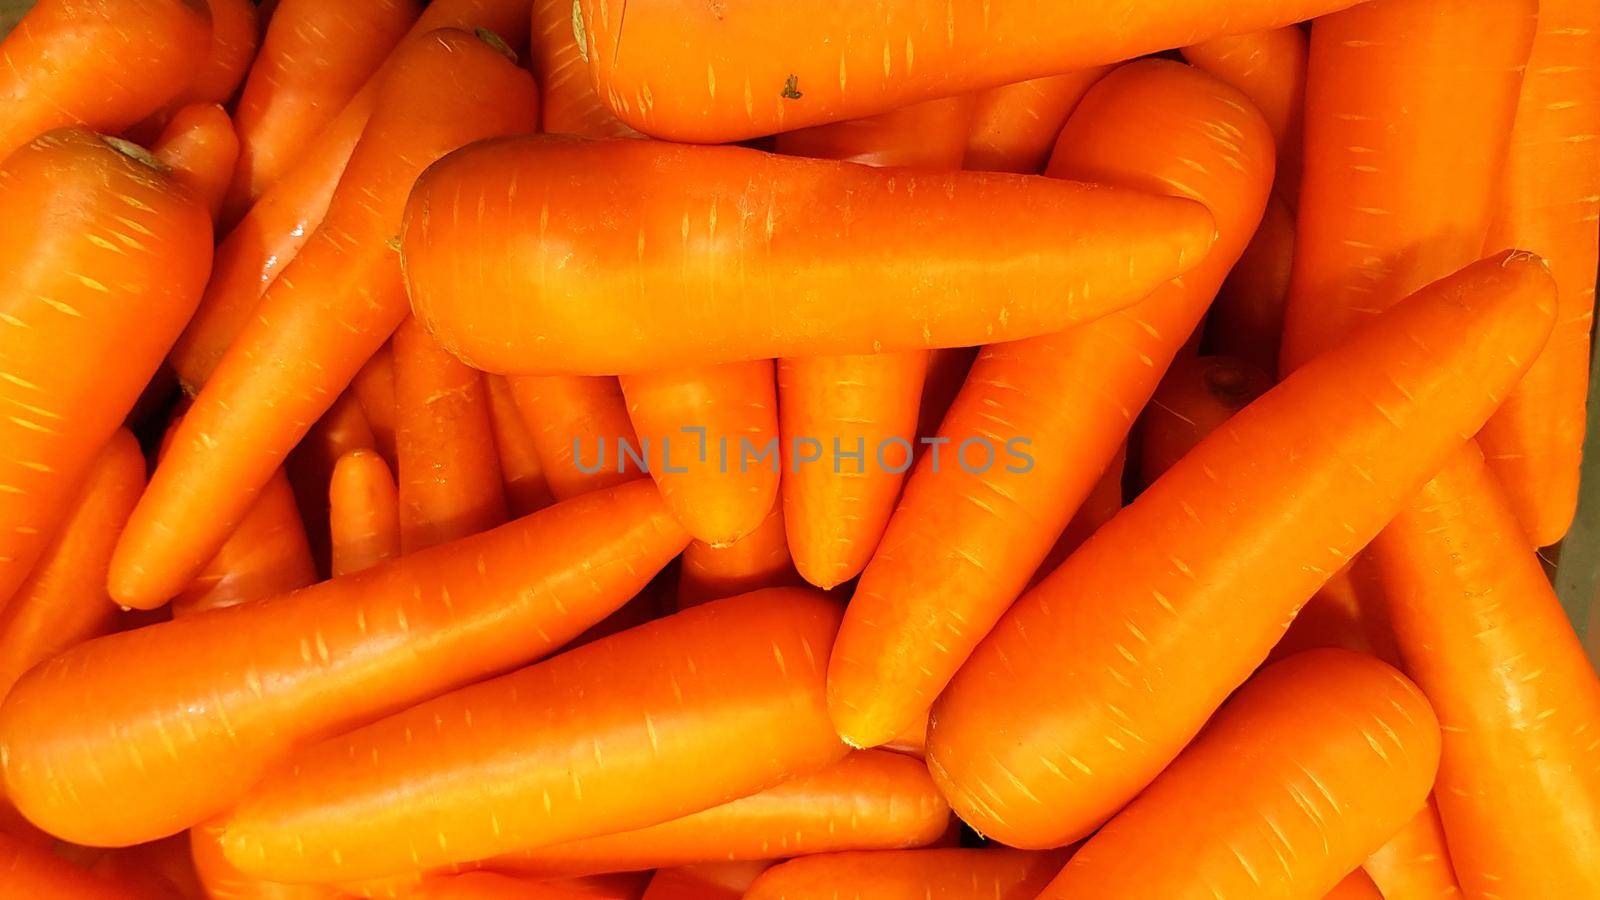 Many carrots are placed together in the shop for sale.